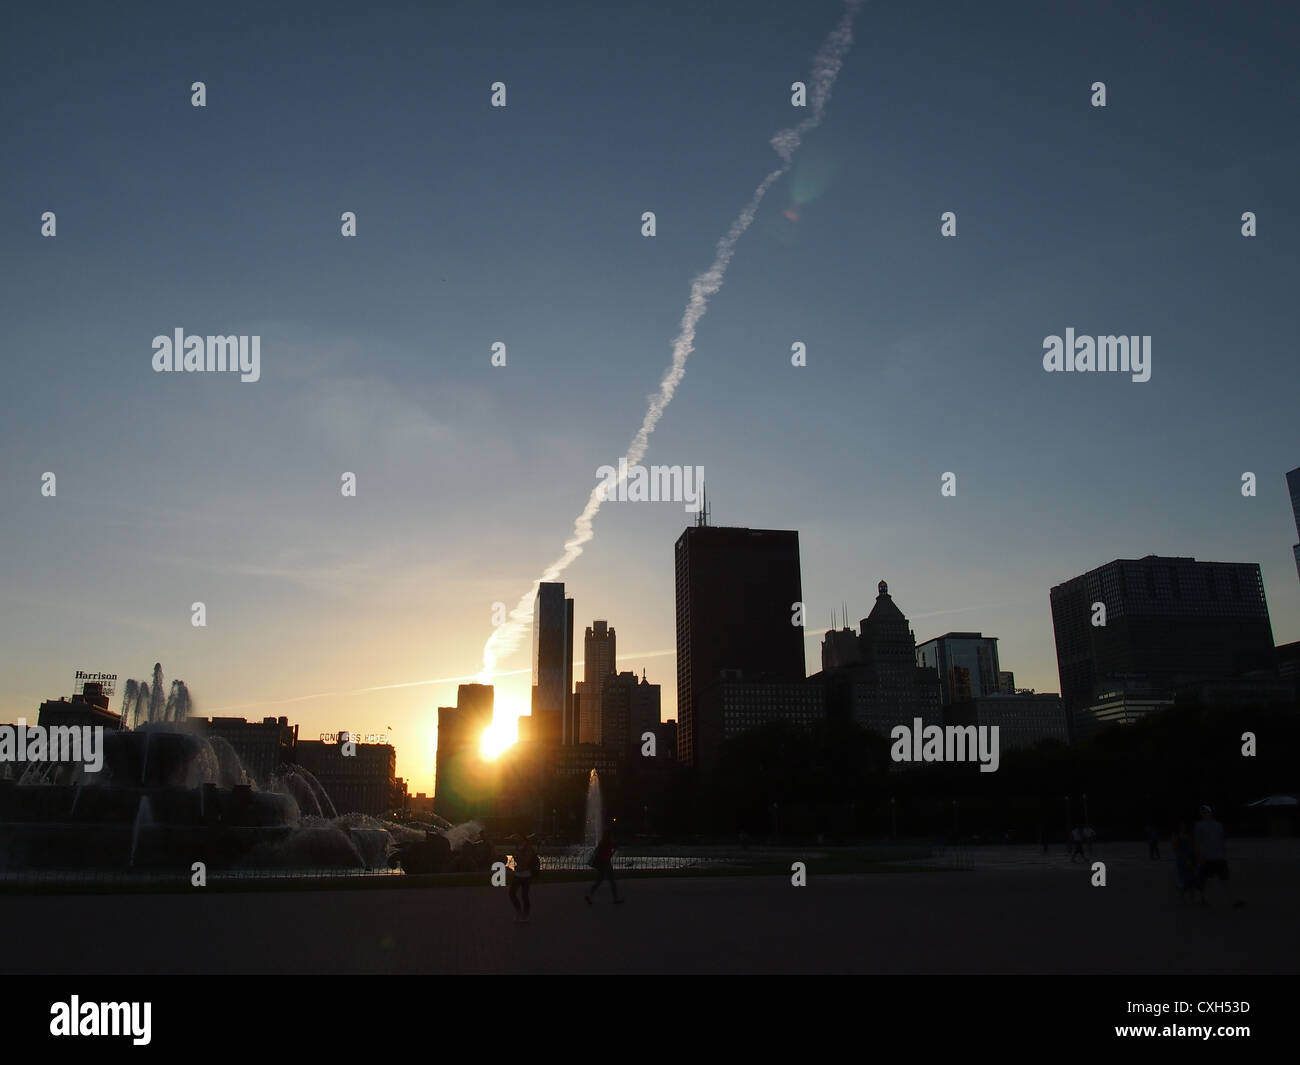 Dramatic View of Vapor-Trail on Chicago Skyline at Sunset Stock Photo